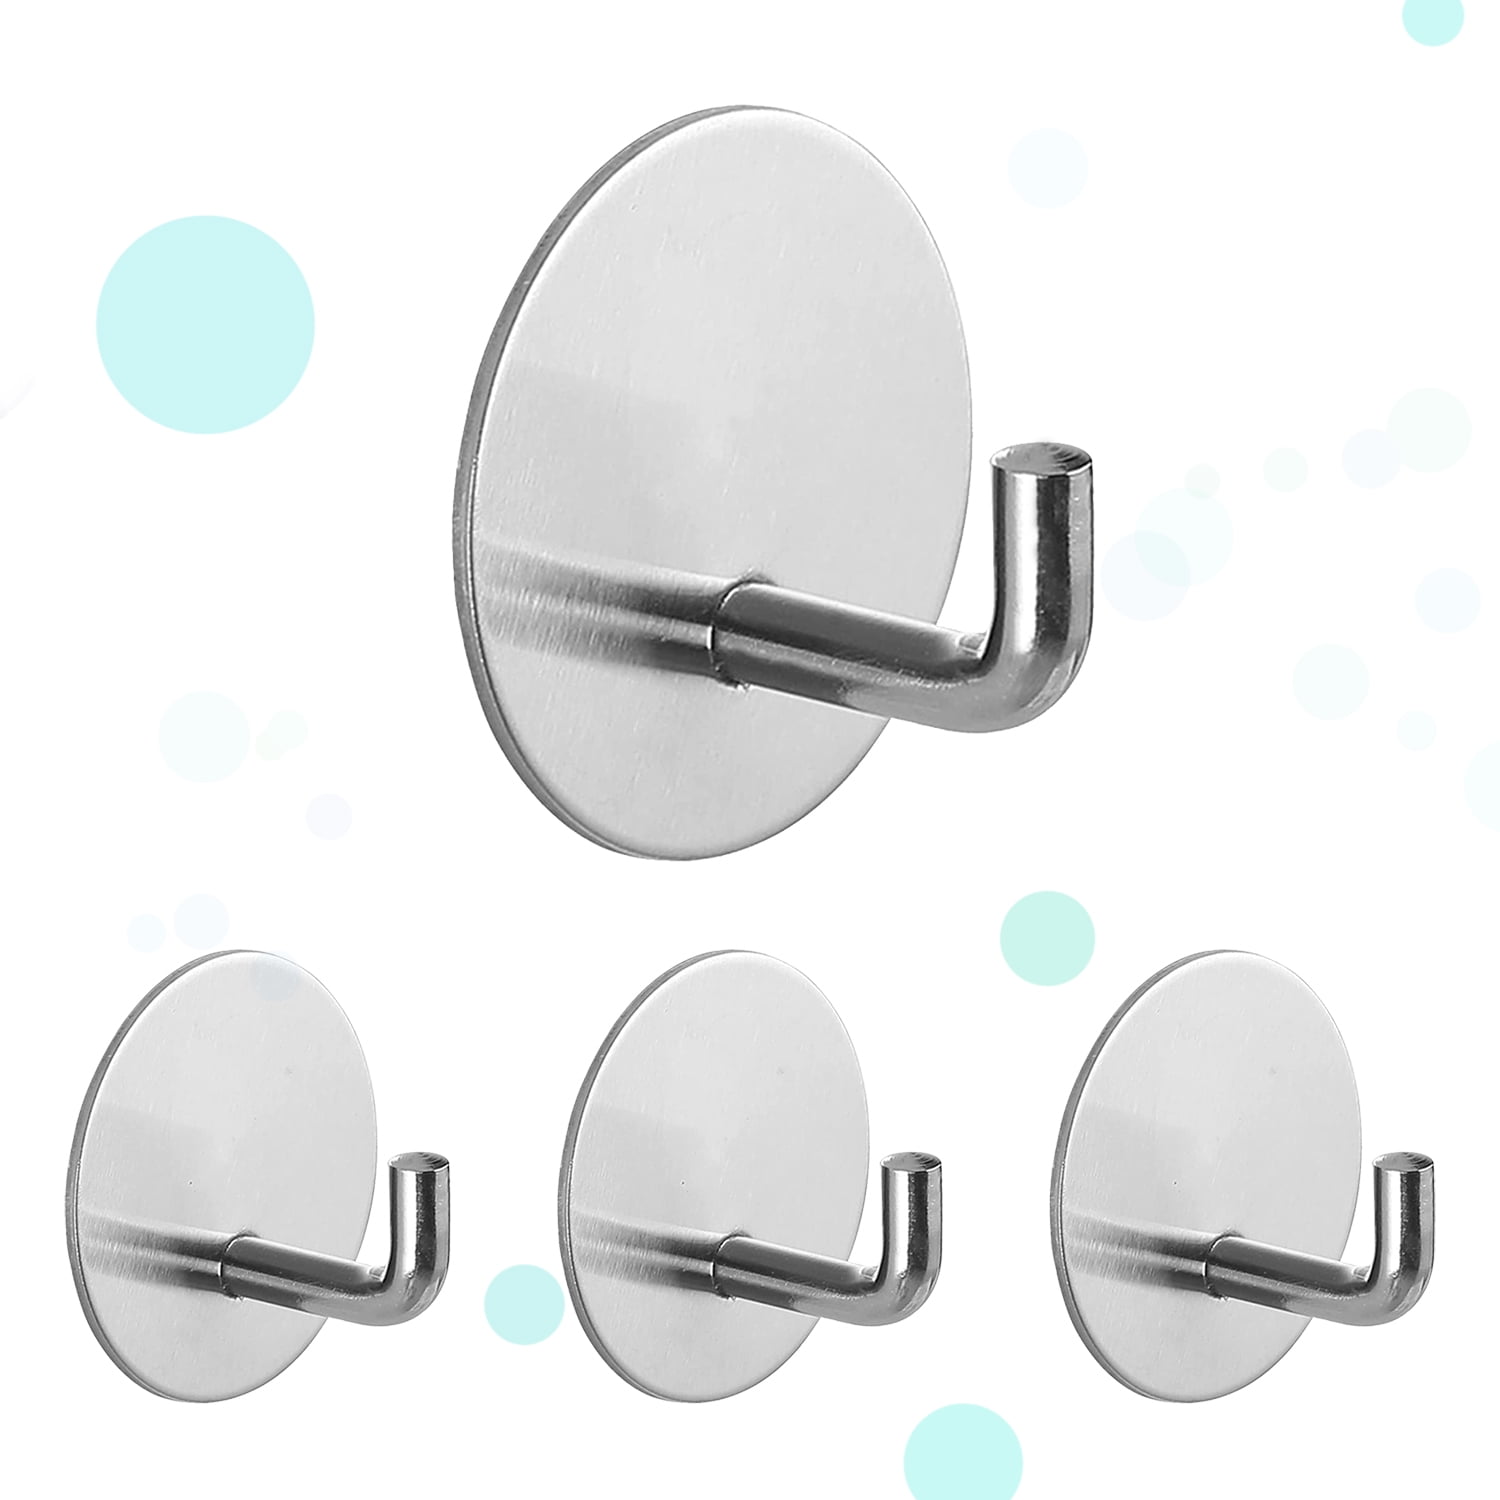 BARONAGE Adhesive Hooks Heavy Duty Waterproof Shower Hook, Bathroom  Stainless Steel Adhesive Wall Hooks for Hanging Towels Loofah Robes  Clothes